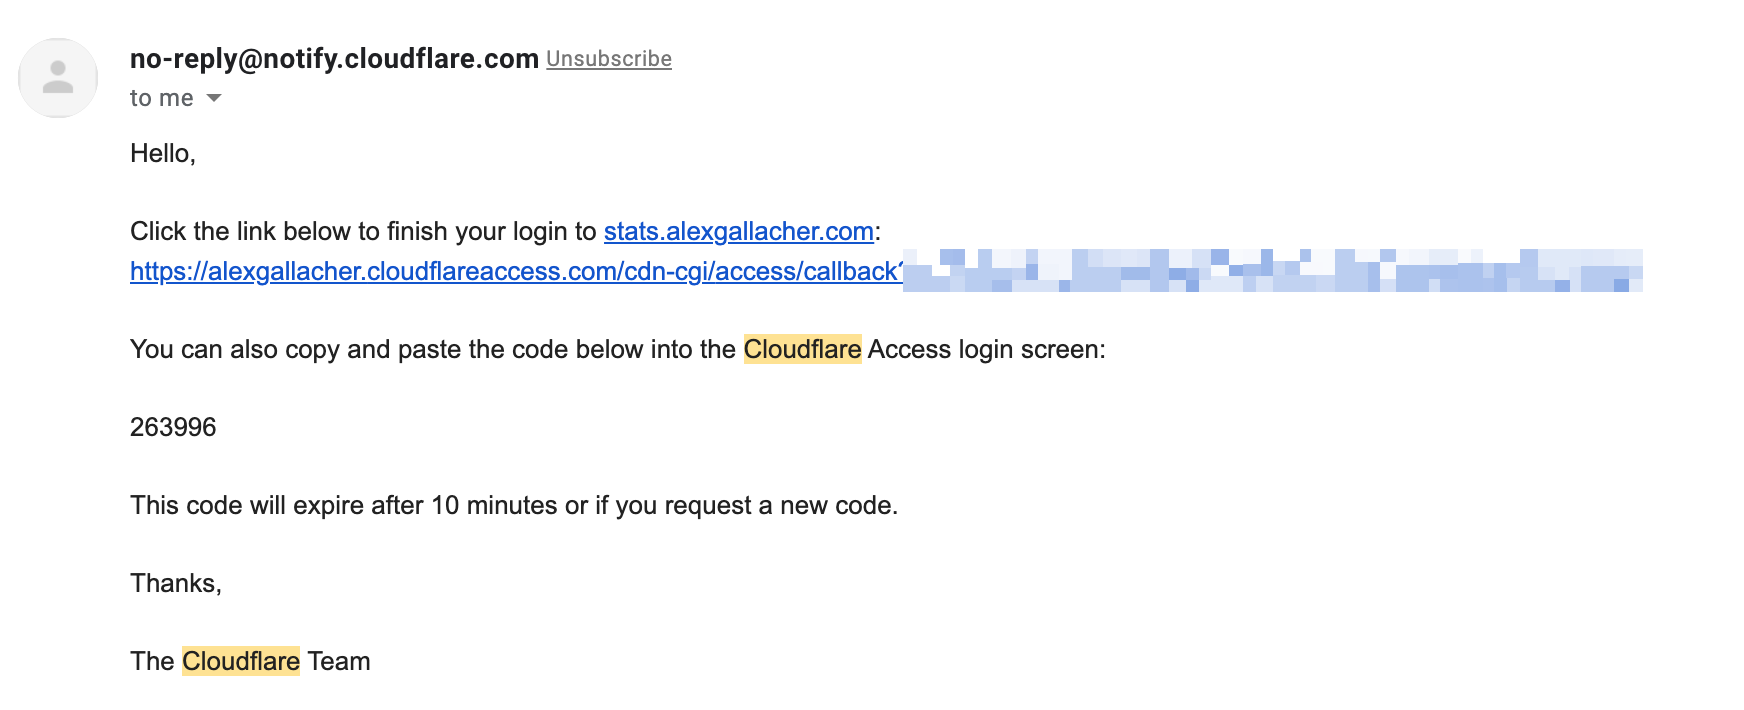 Email showing One Time PIN (OTP) from Cloudflare